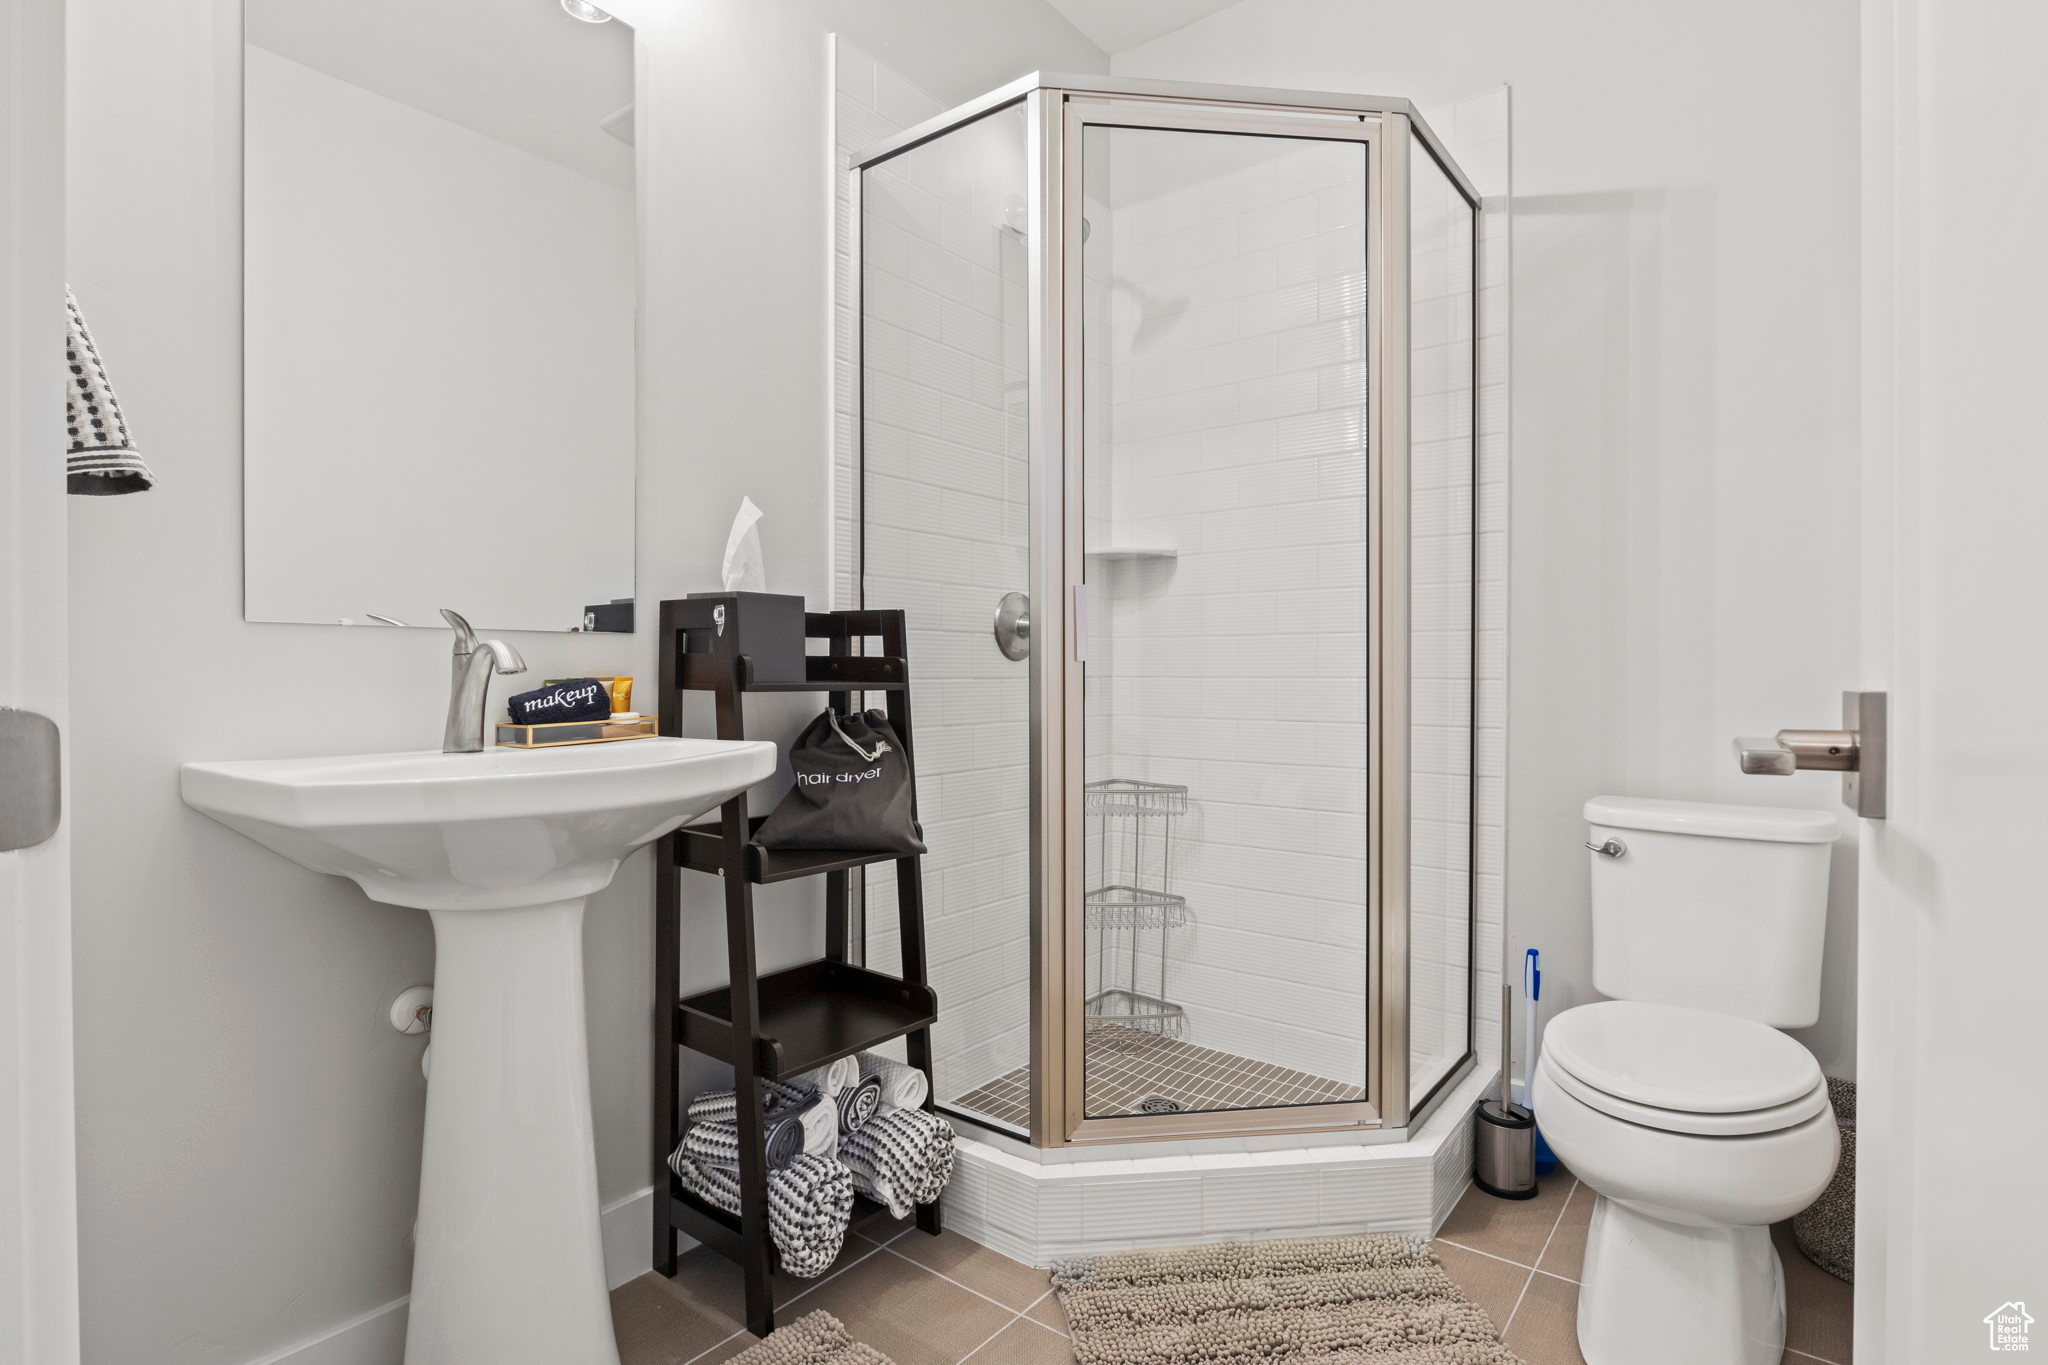 Bathroom with walk in shower, toilet, and tile floors